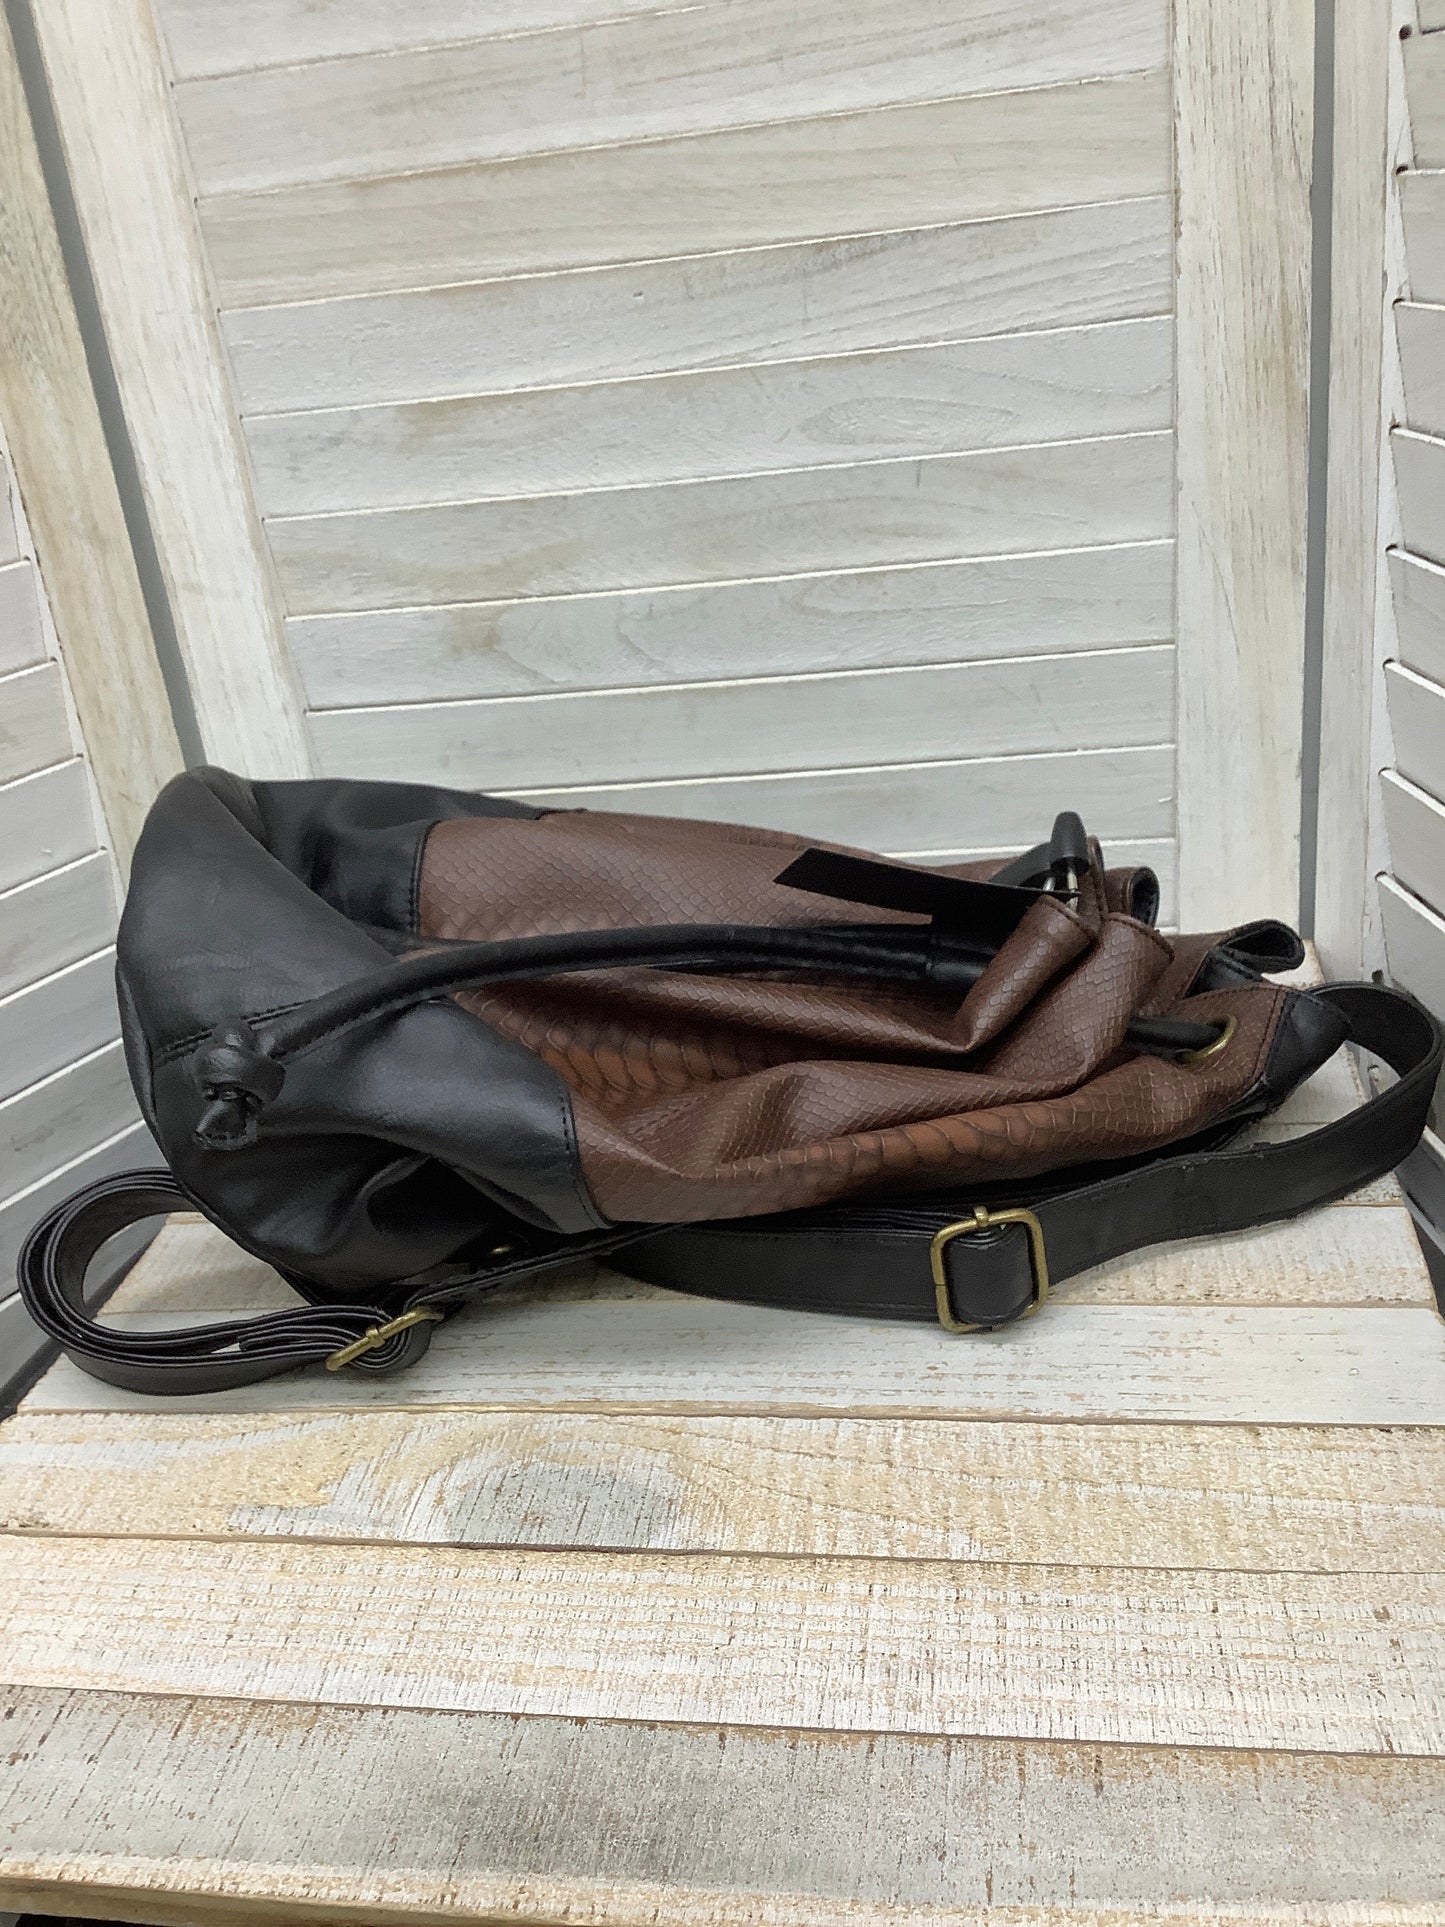 Backpack By Clothes Mentor  Size: Medium